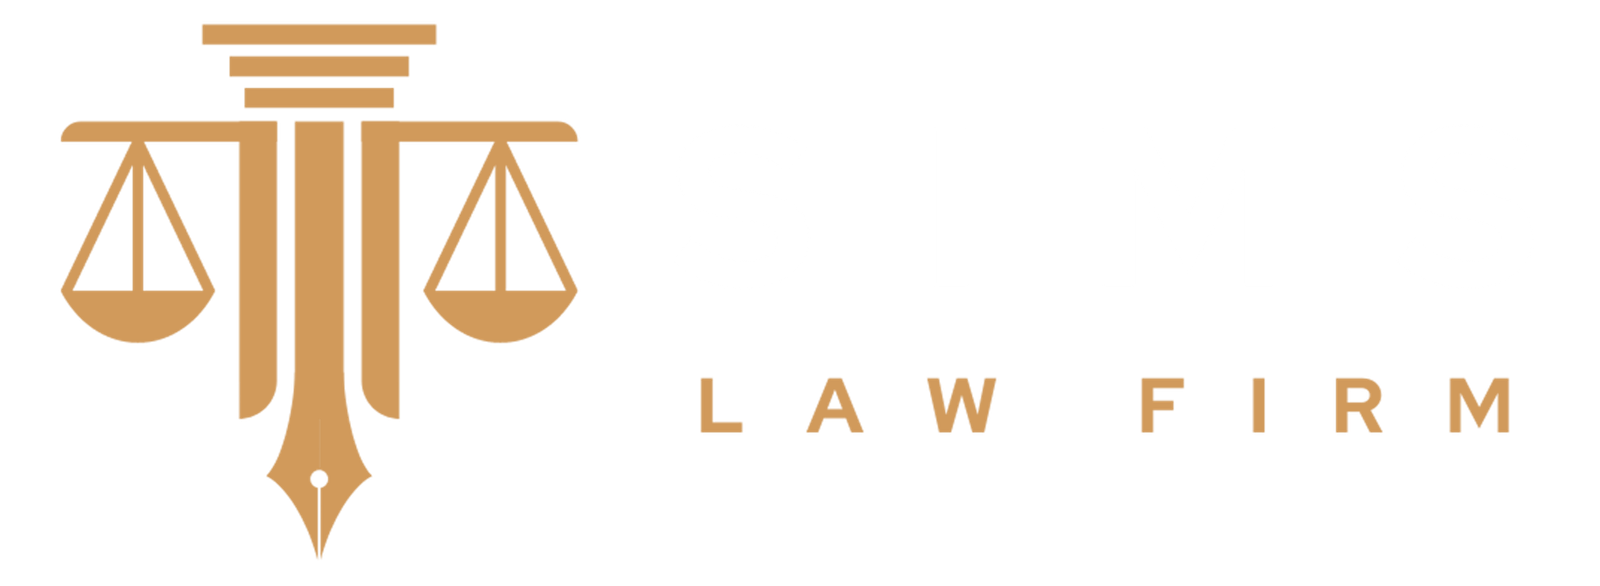 Sims Law Firm Logo White and Gold - Transparent